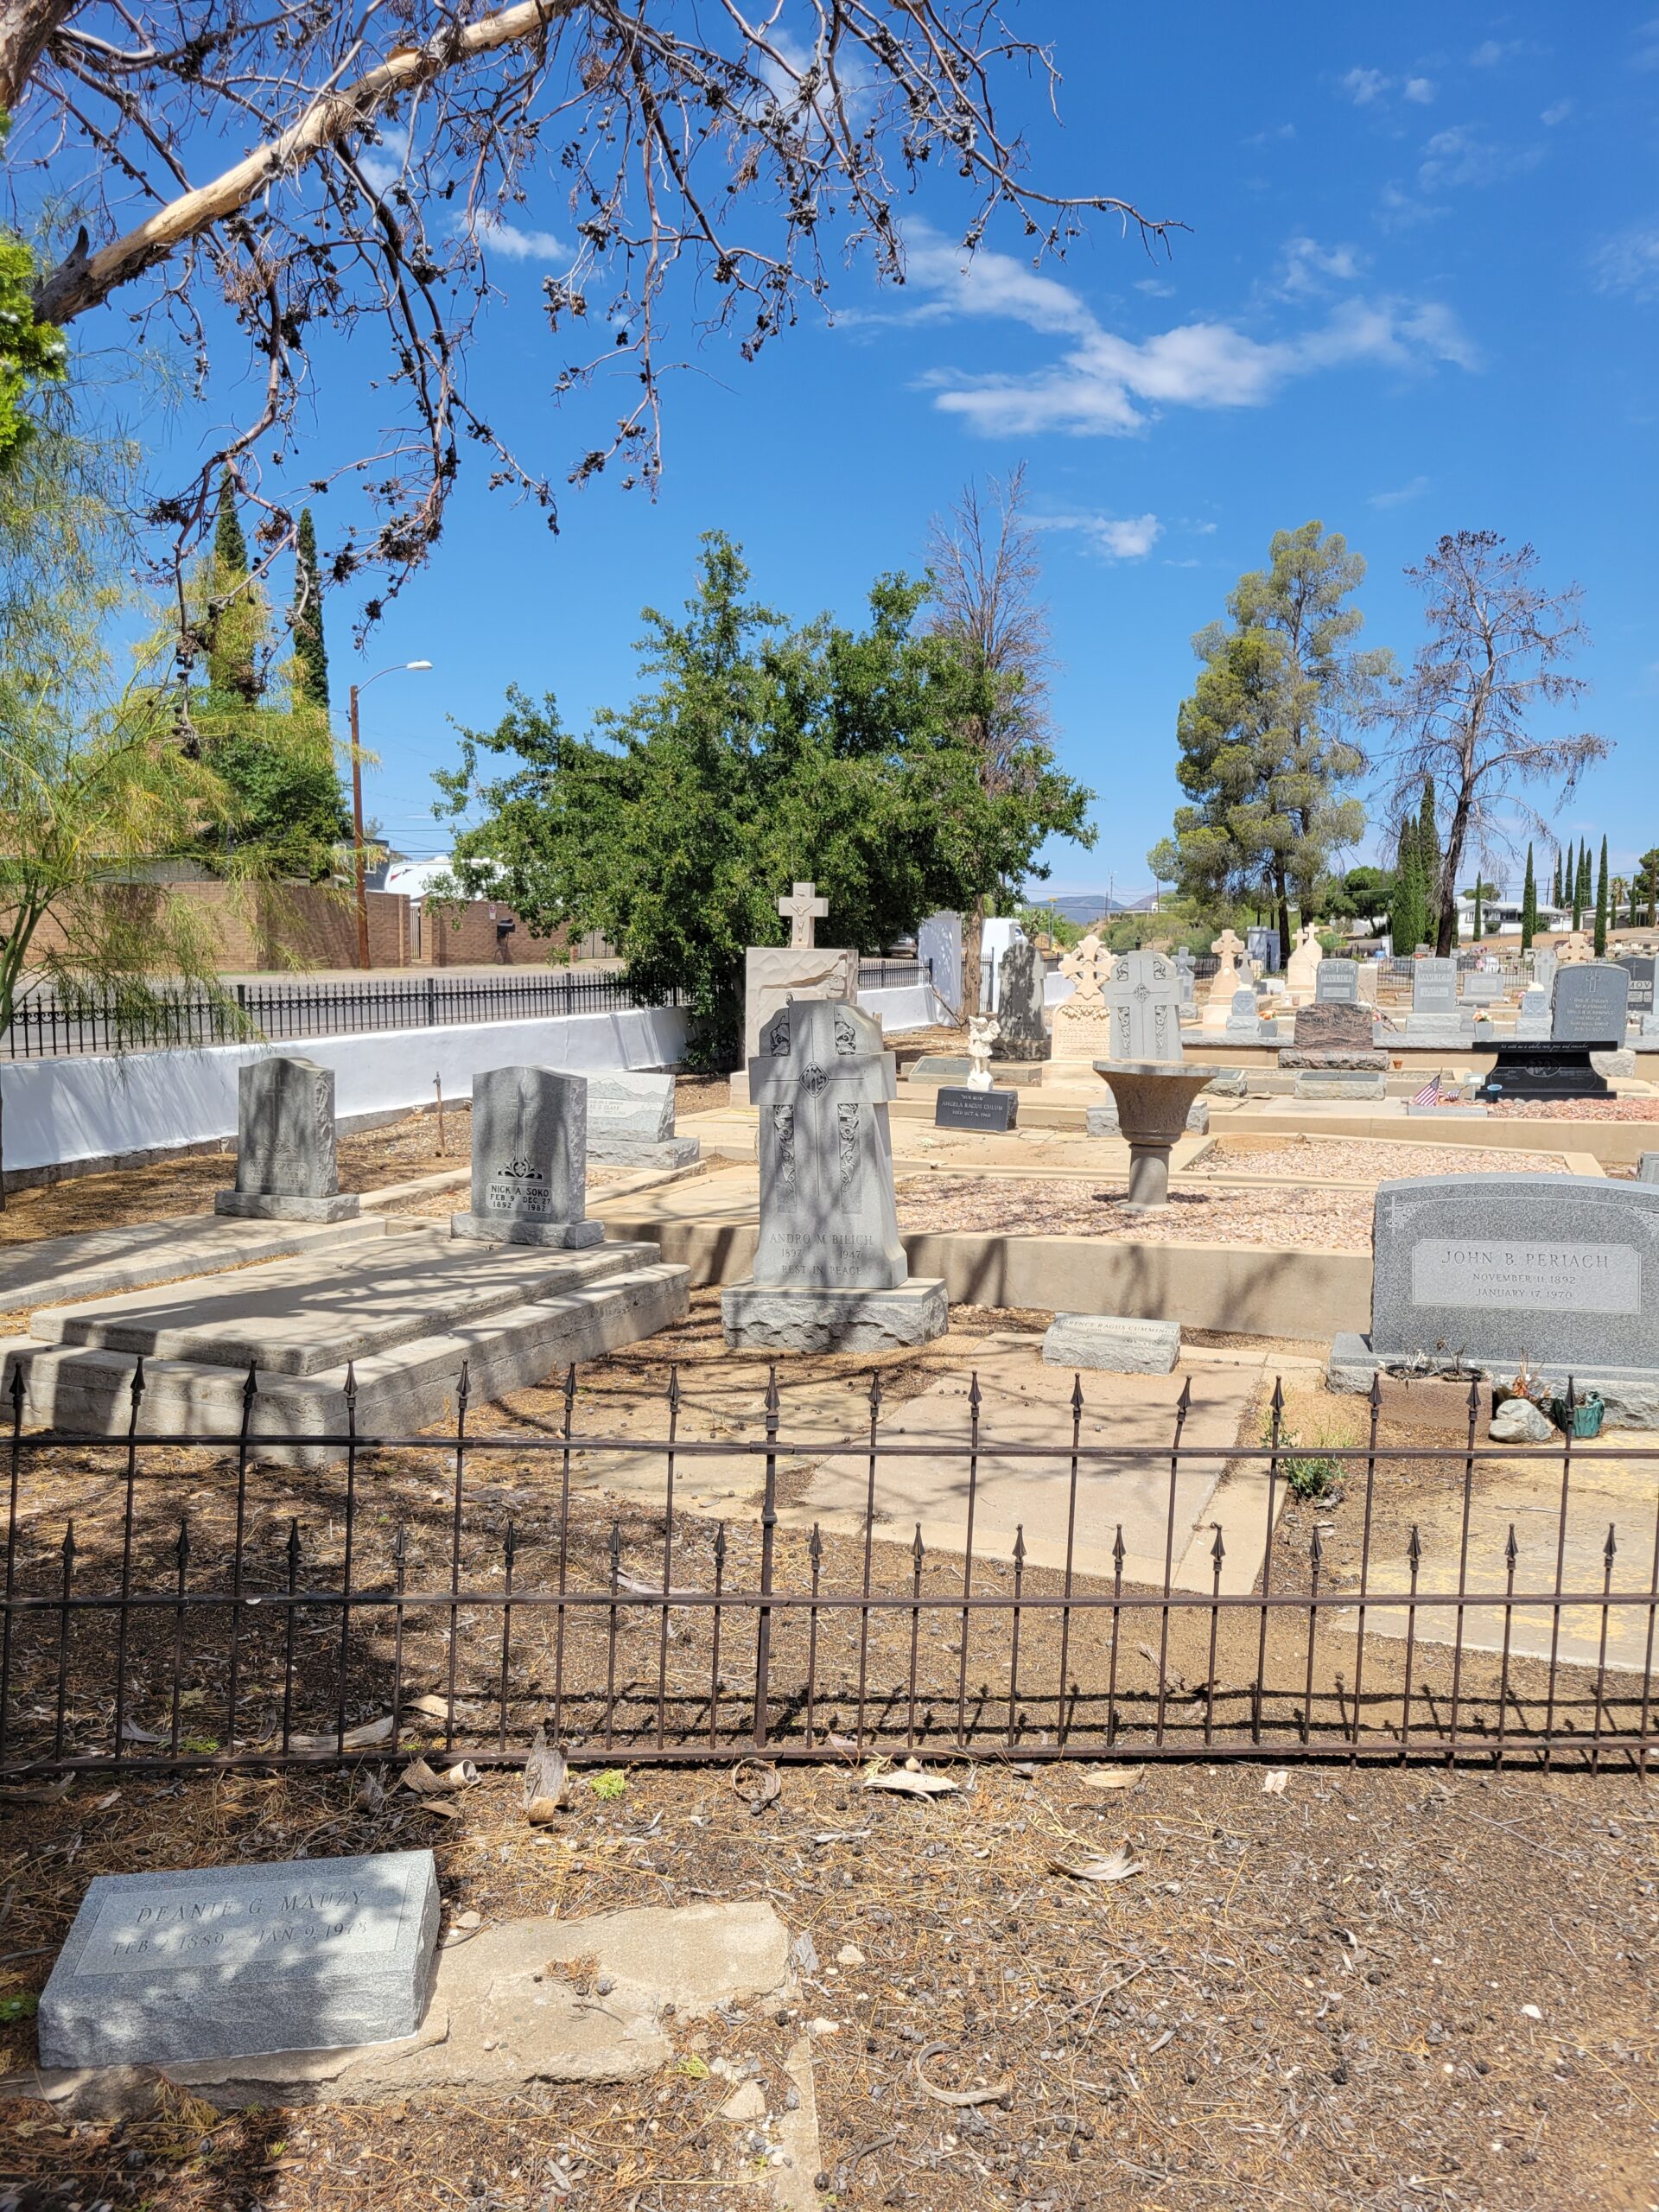 Graves Behind a Fenced Area